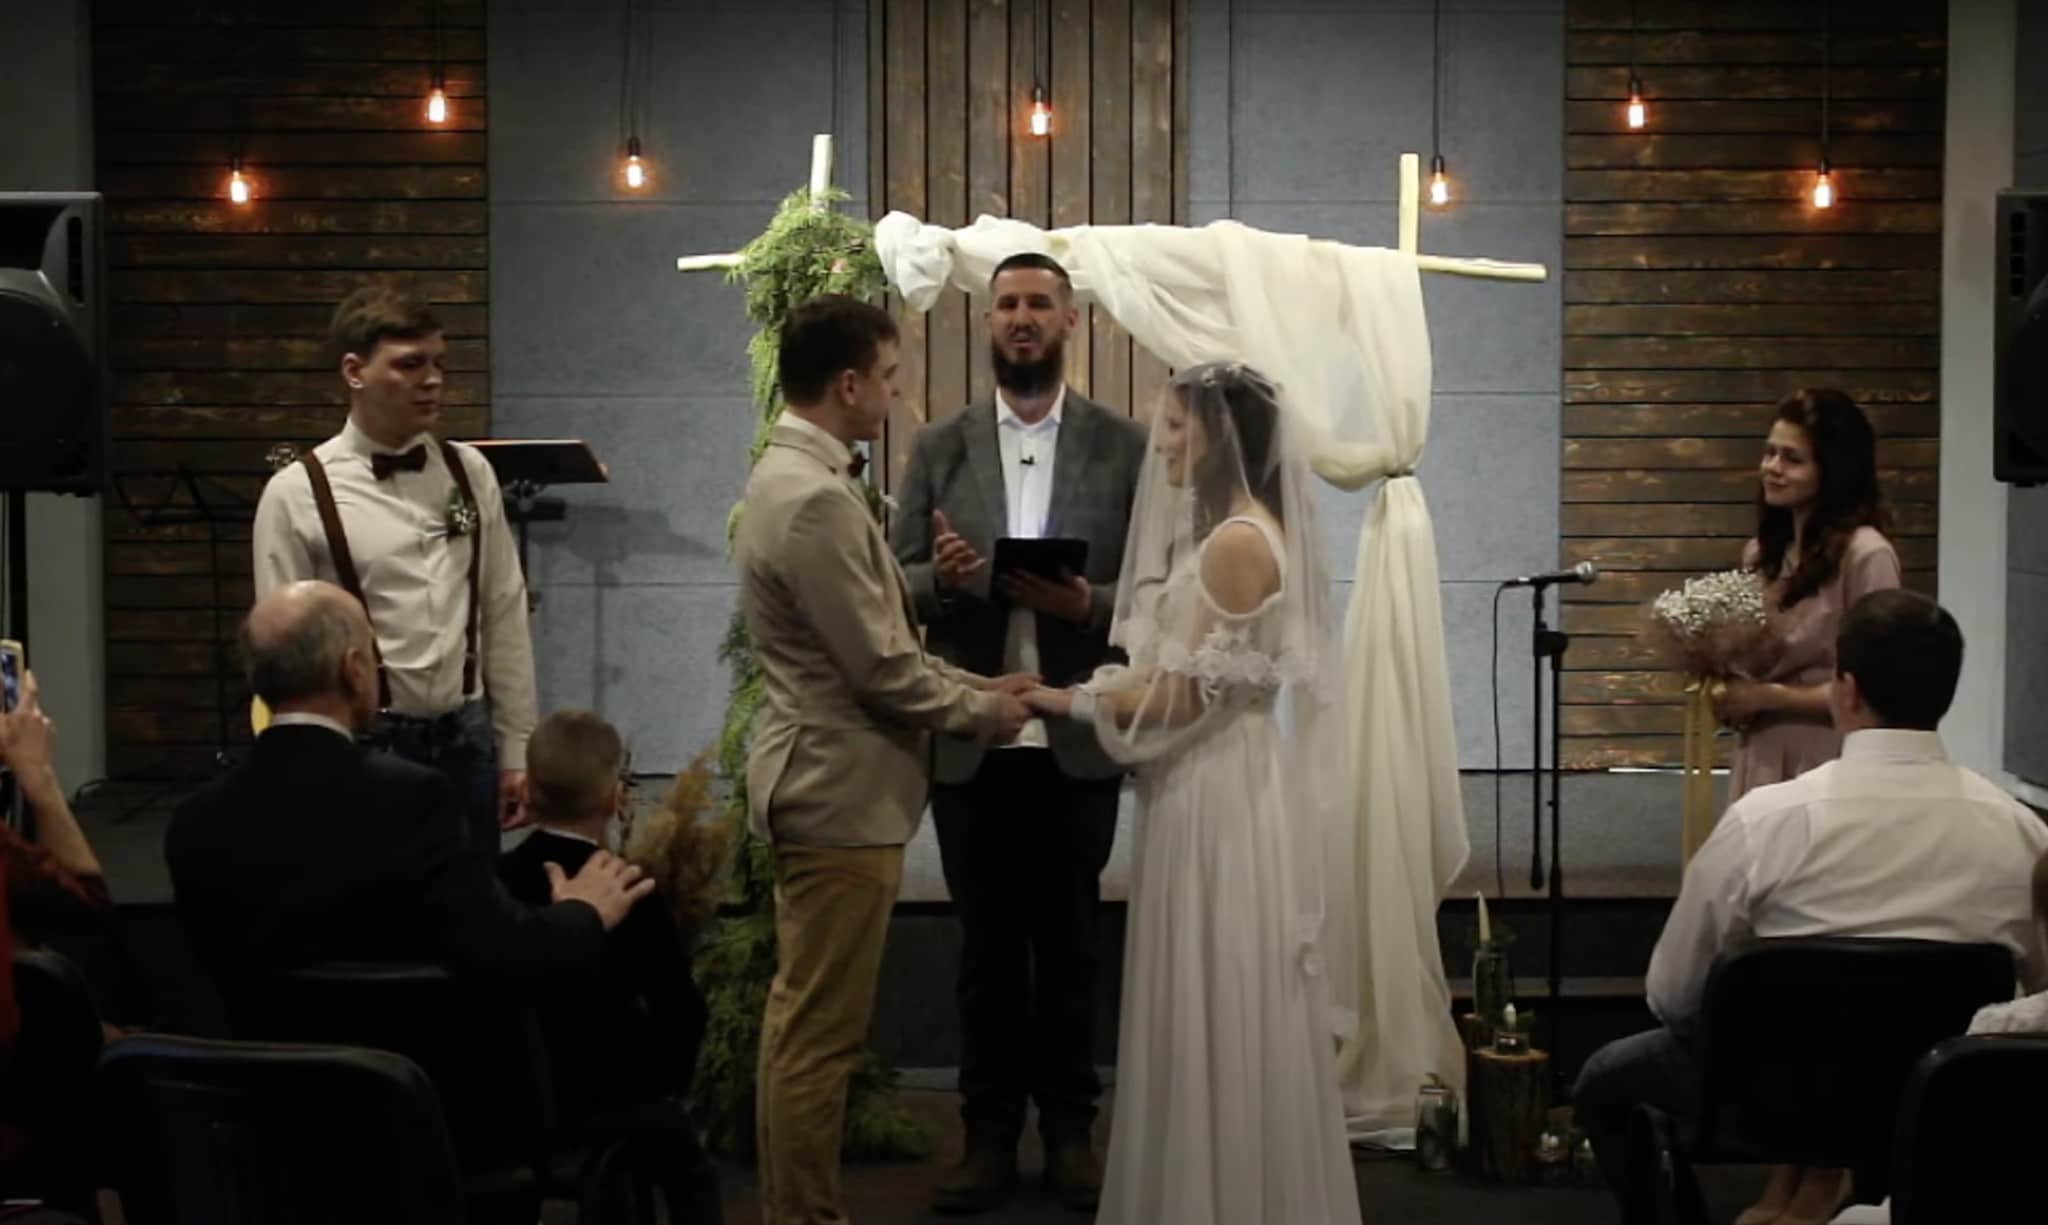 Pastor Benjamin Morrison solemnising the wedding of Andrey and Nadya on the third day of the war in Ukraine. what better reminder that even war cannot stamp out love?